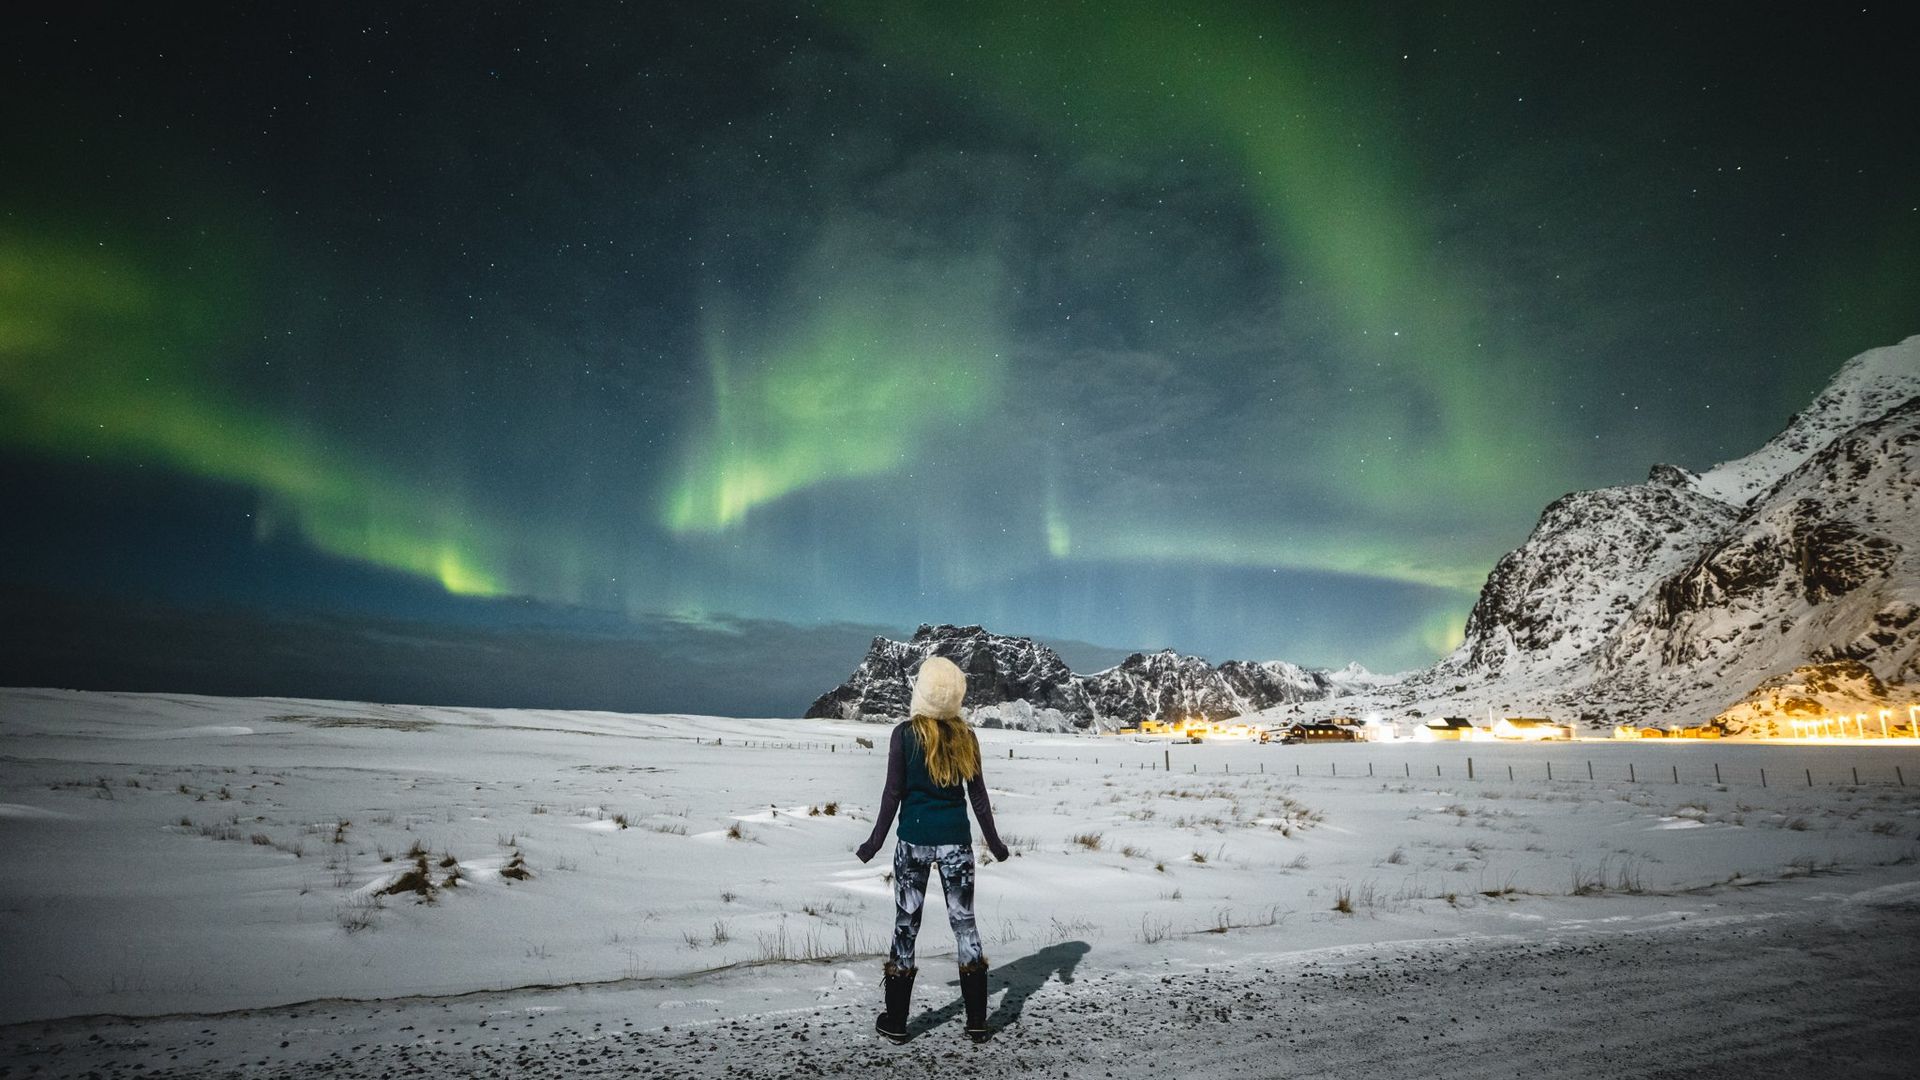 A woman stands on the pale sands of a beach in Norway looking up at the Northern Lights.